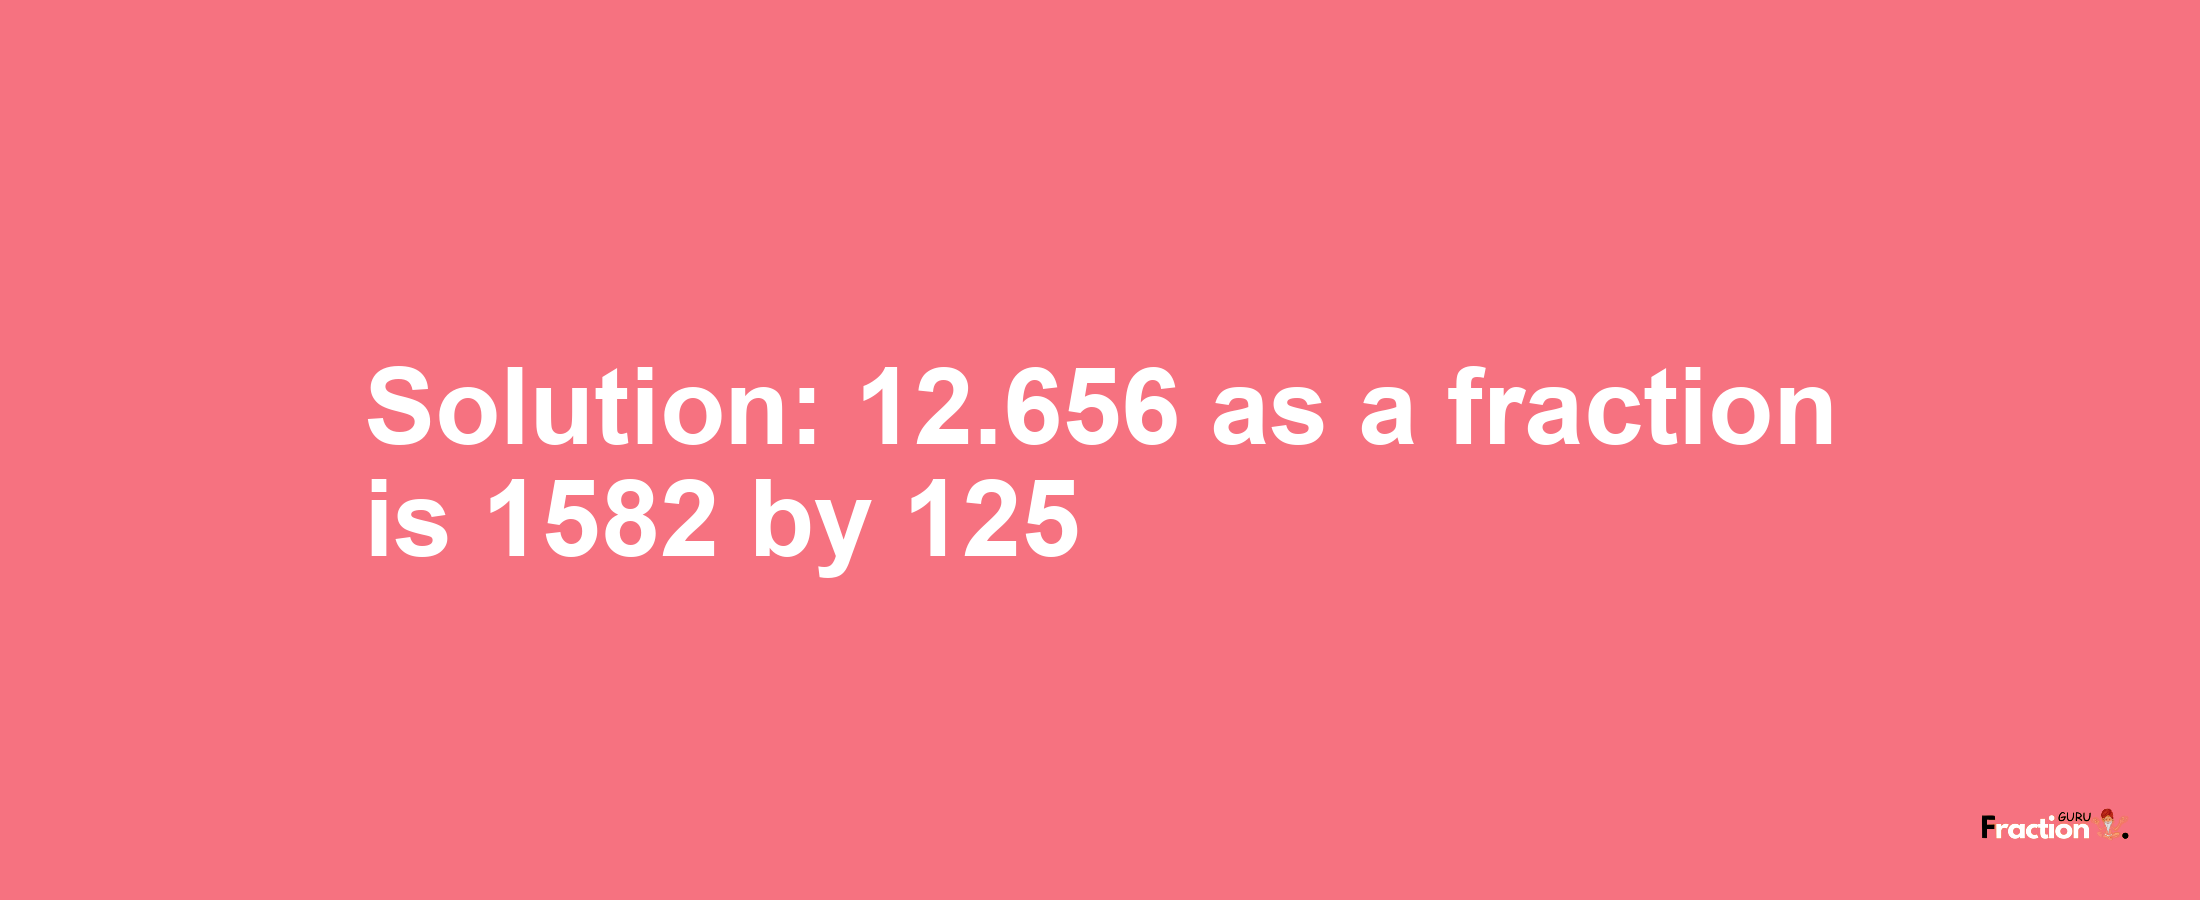 Solution:12.656 as a fraction is 1582/125